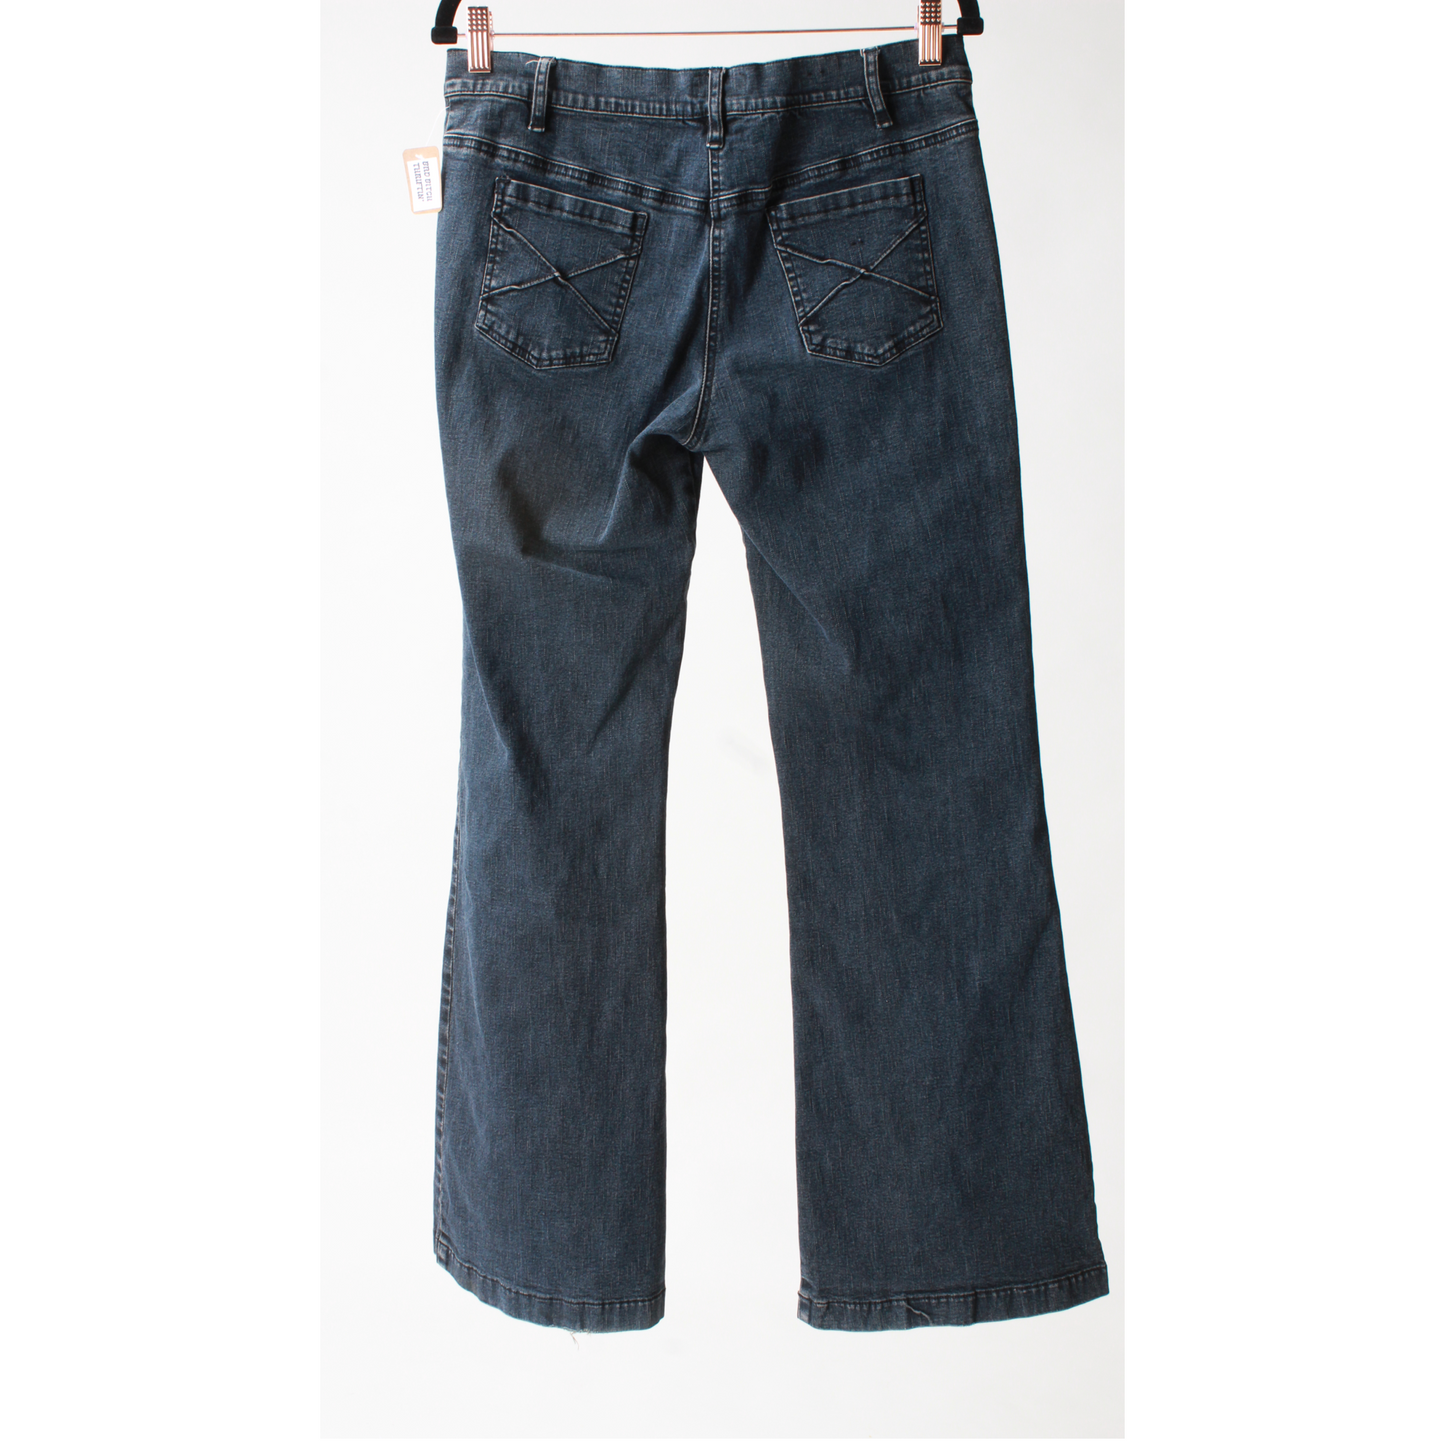 Y2K Flared Jeans (7)